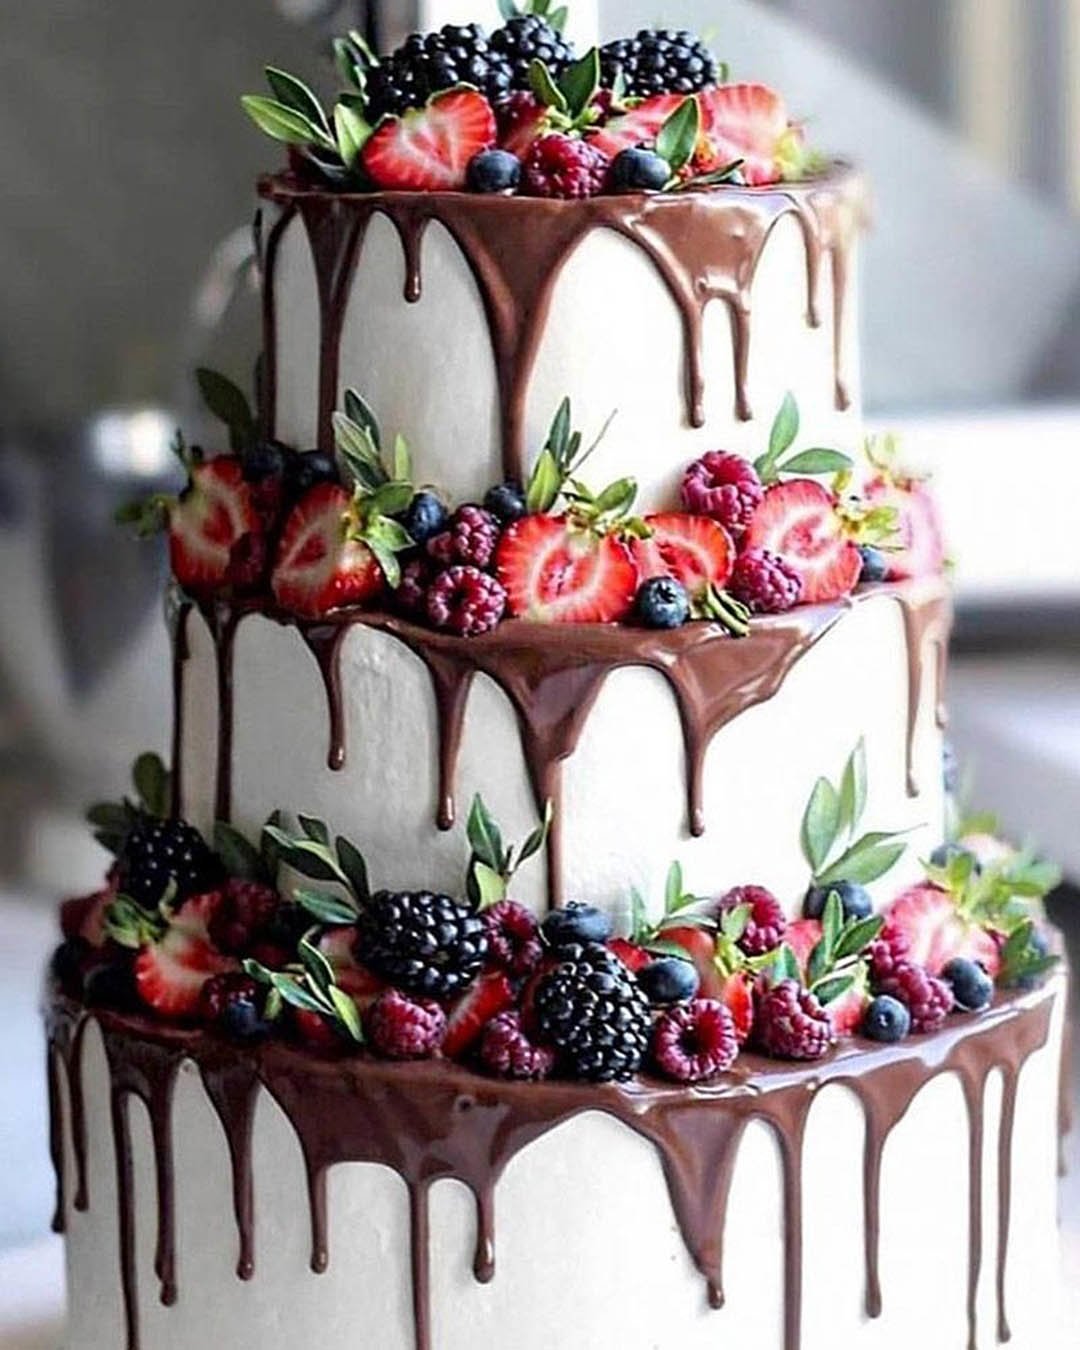 drip wedding cakes drip chocolate sweets and fruits